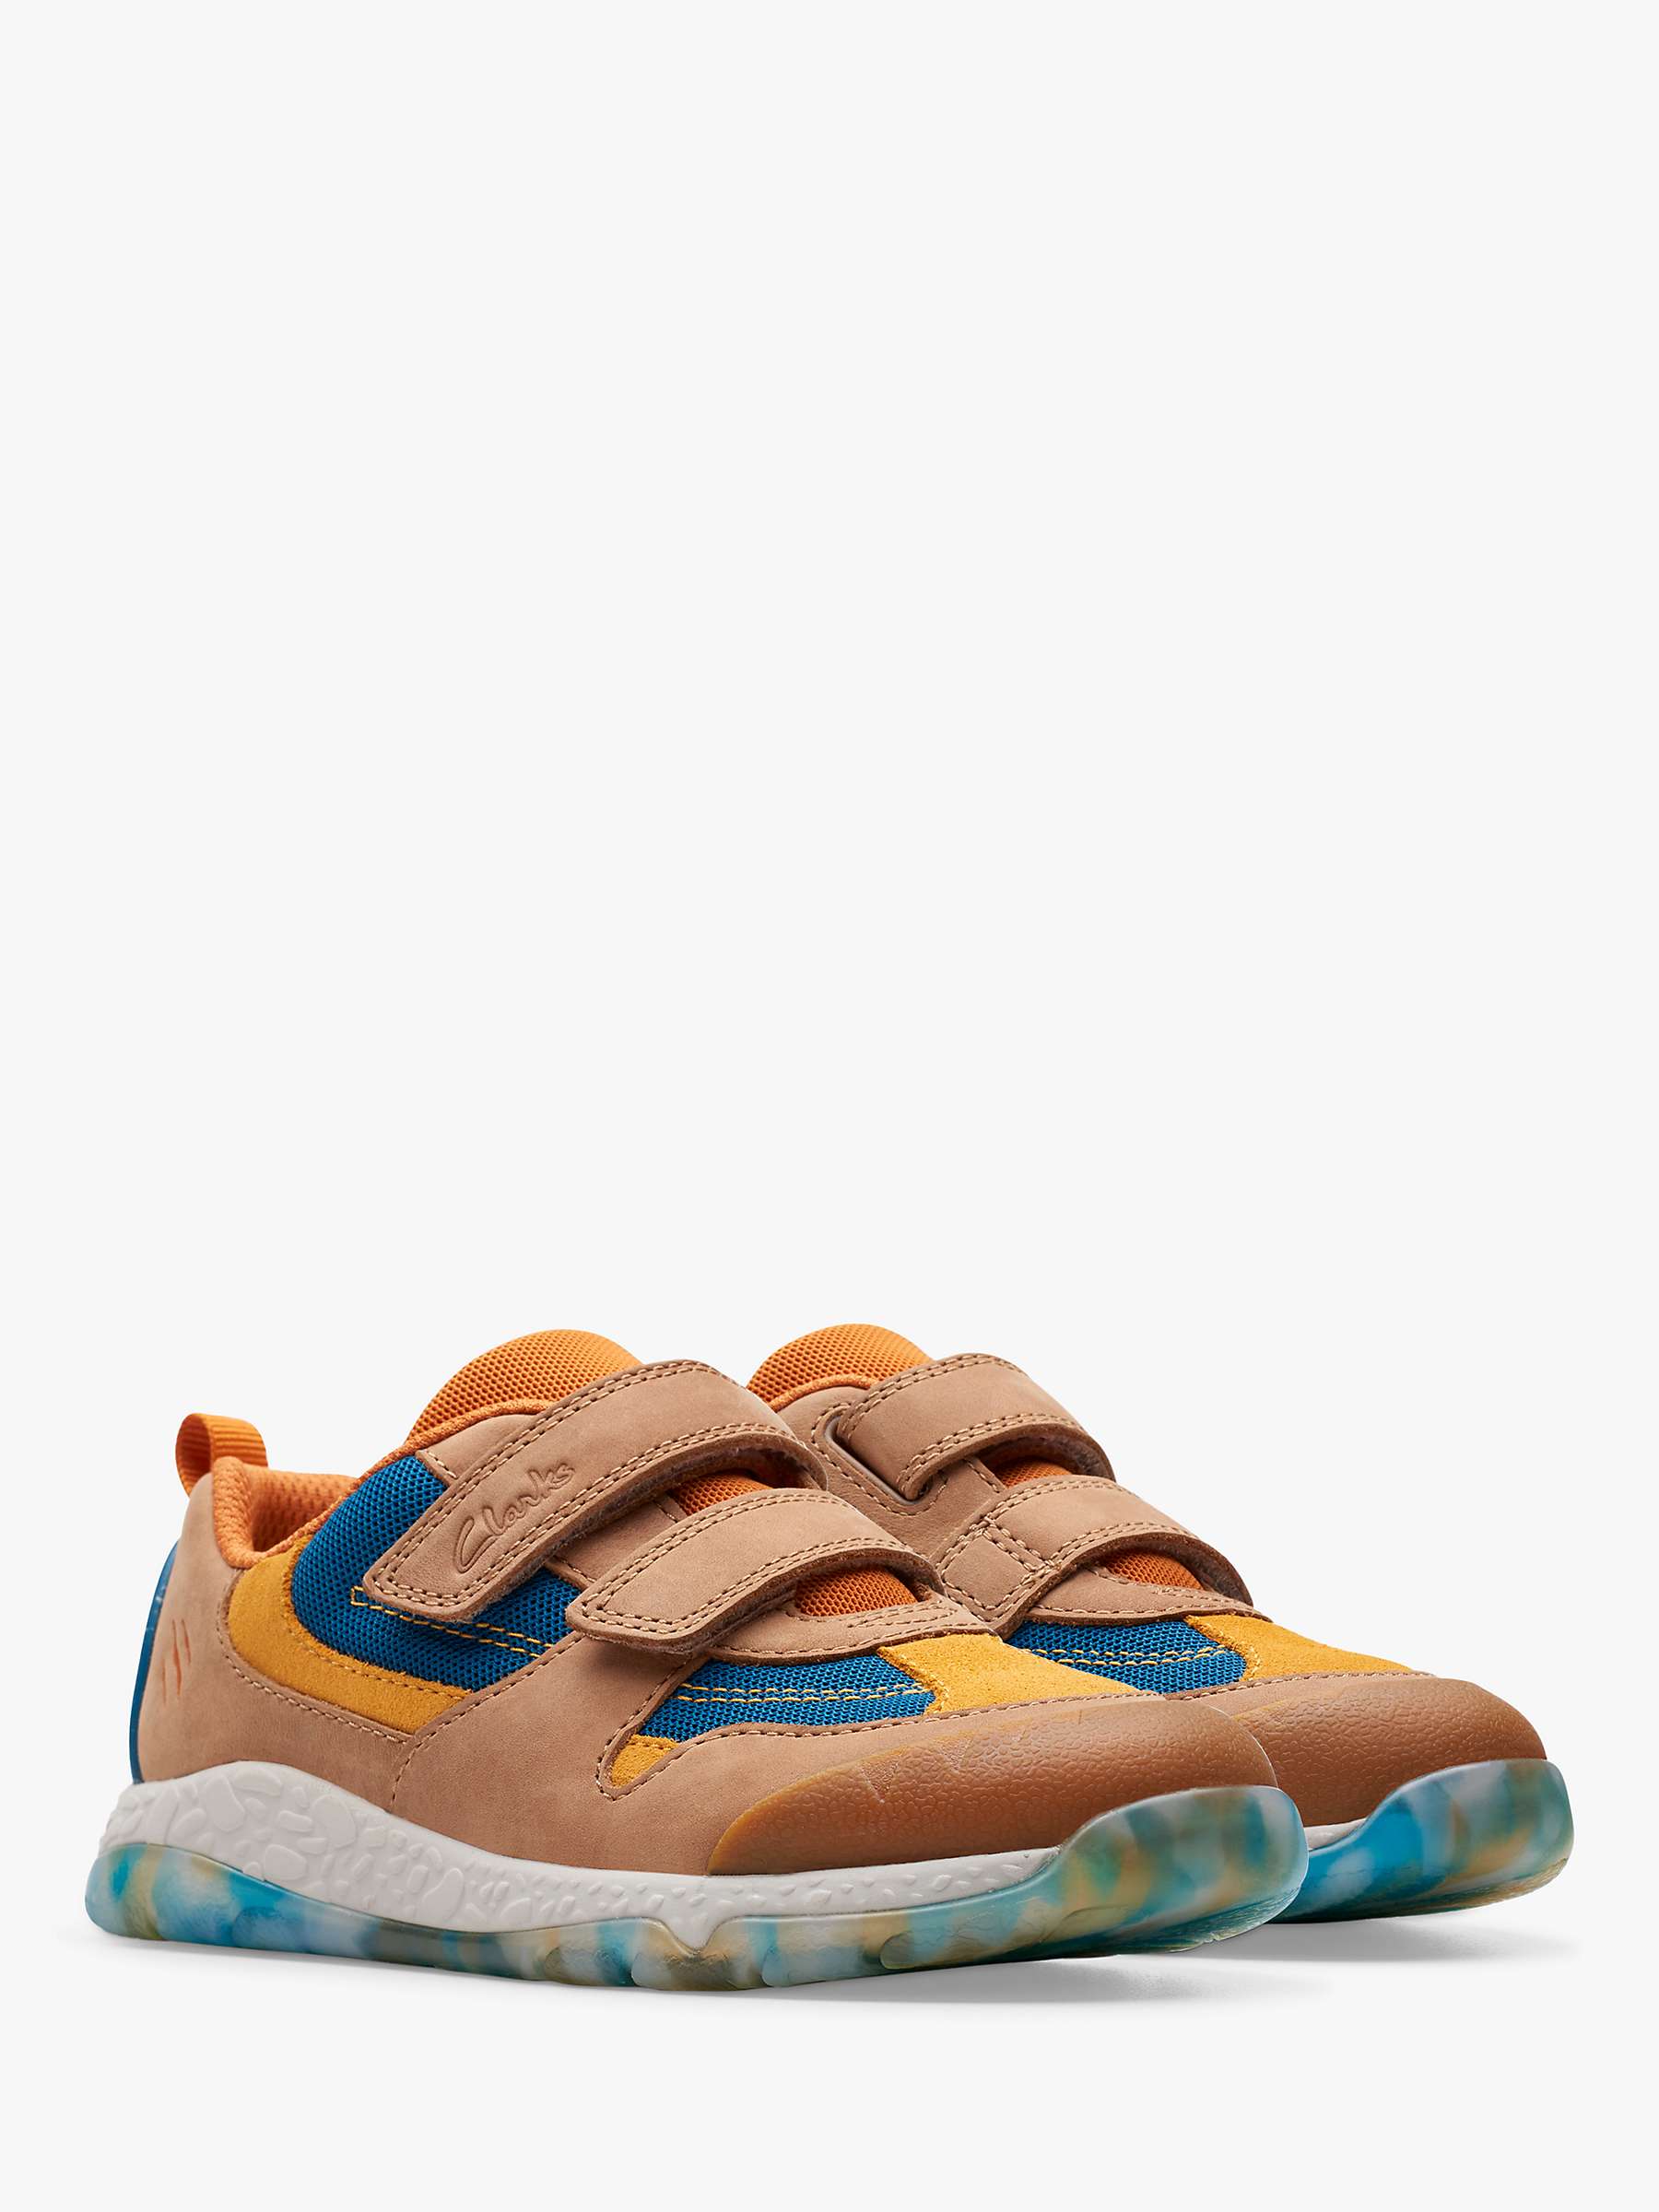 Buy Clarks Kids' 3D Steggy Tail Fun Trainers, Tan Online at johnlewis.com